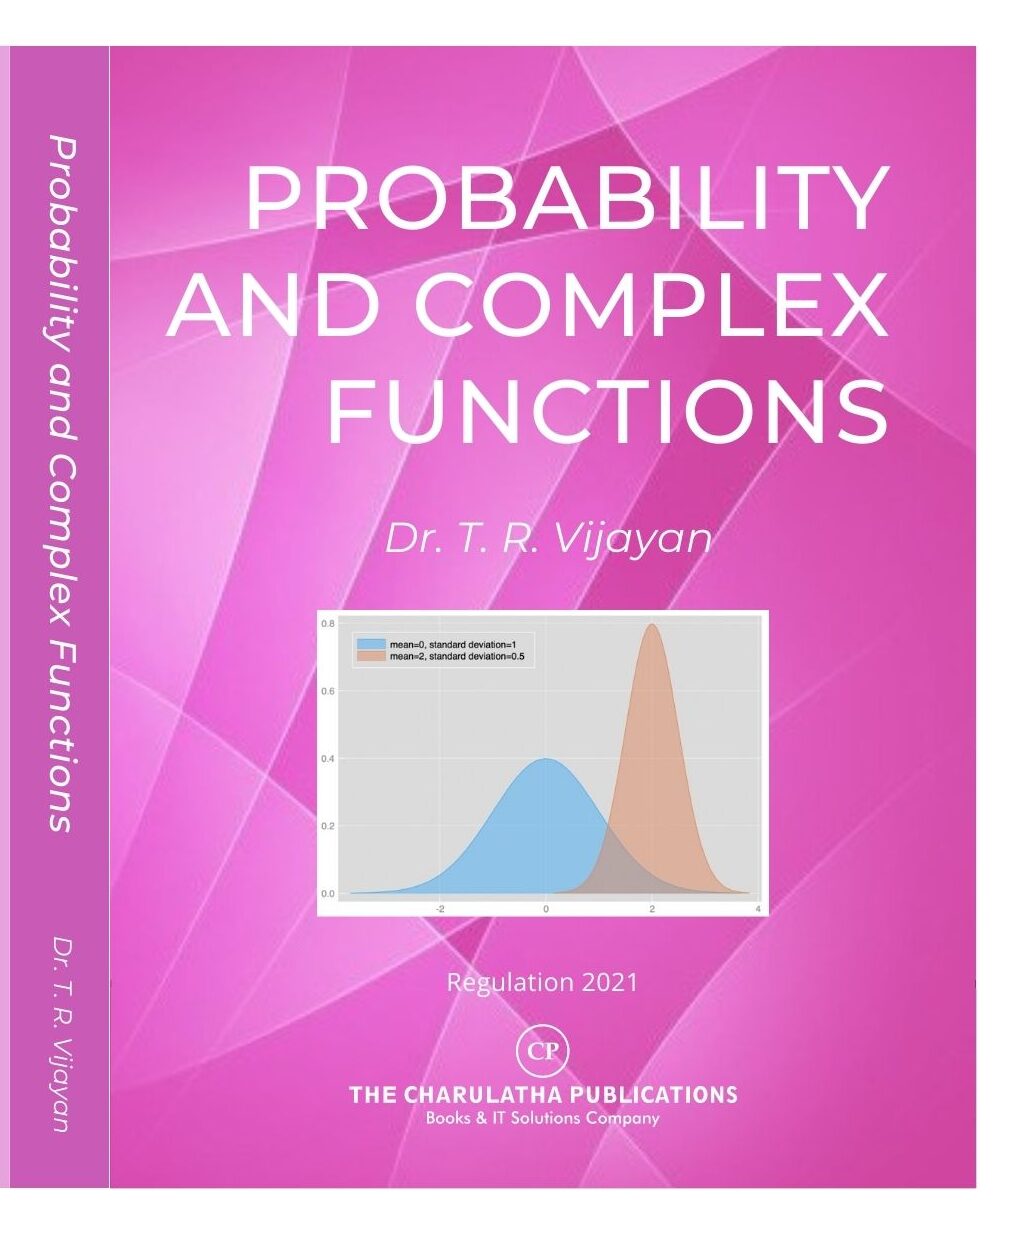 The charulatha publications Probability and complex functions